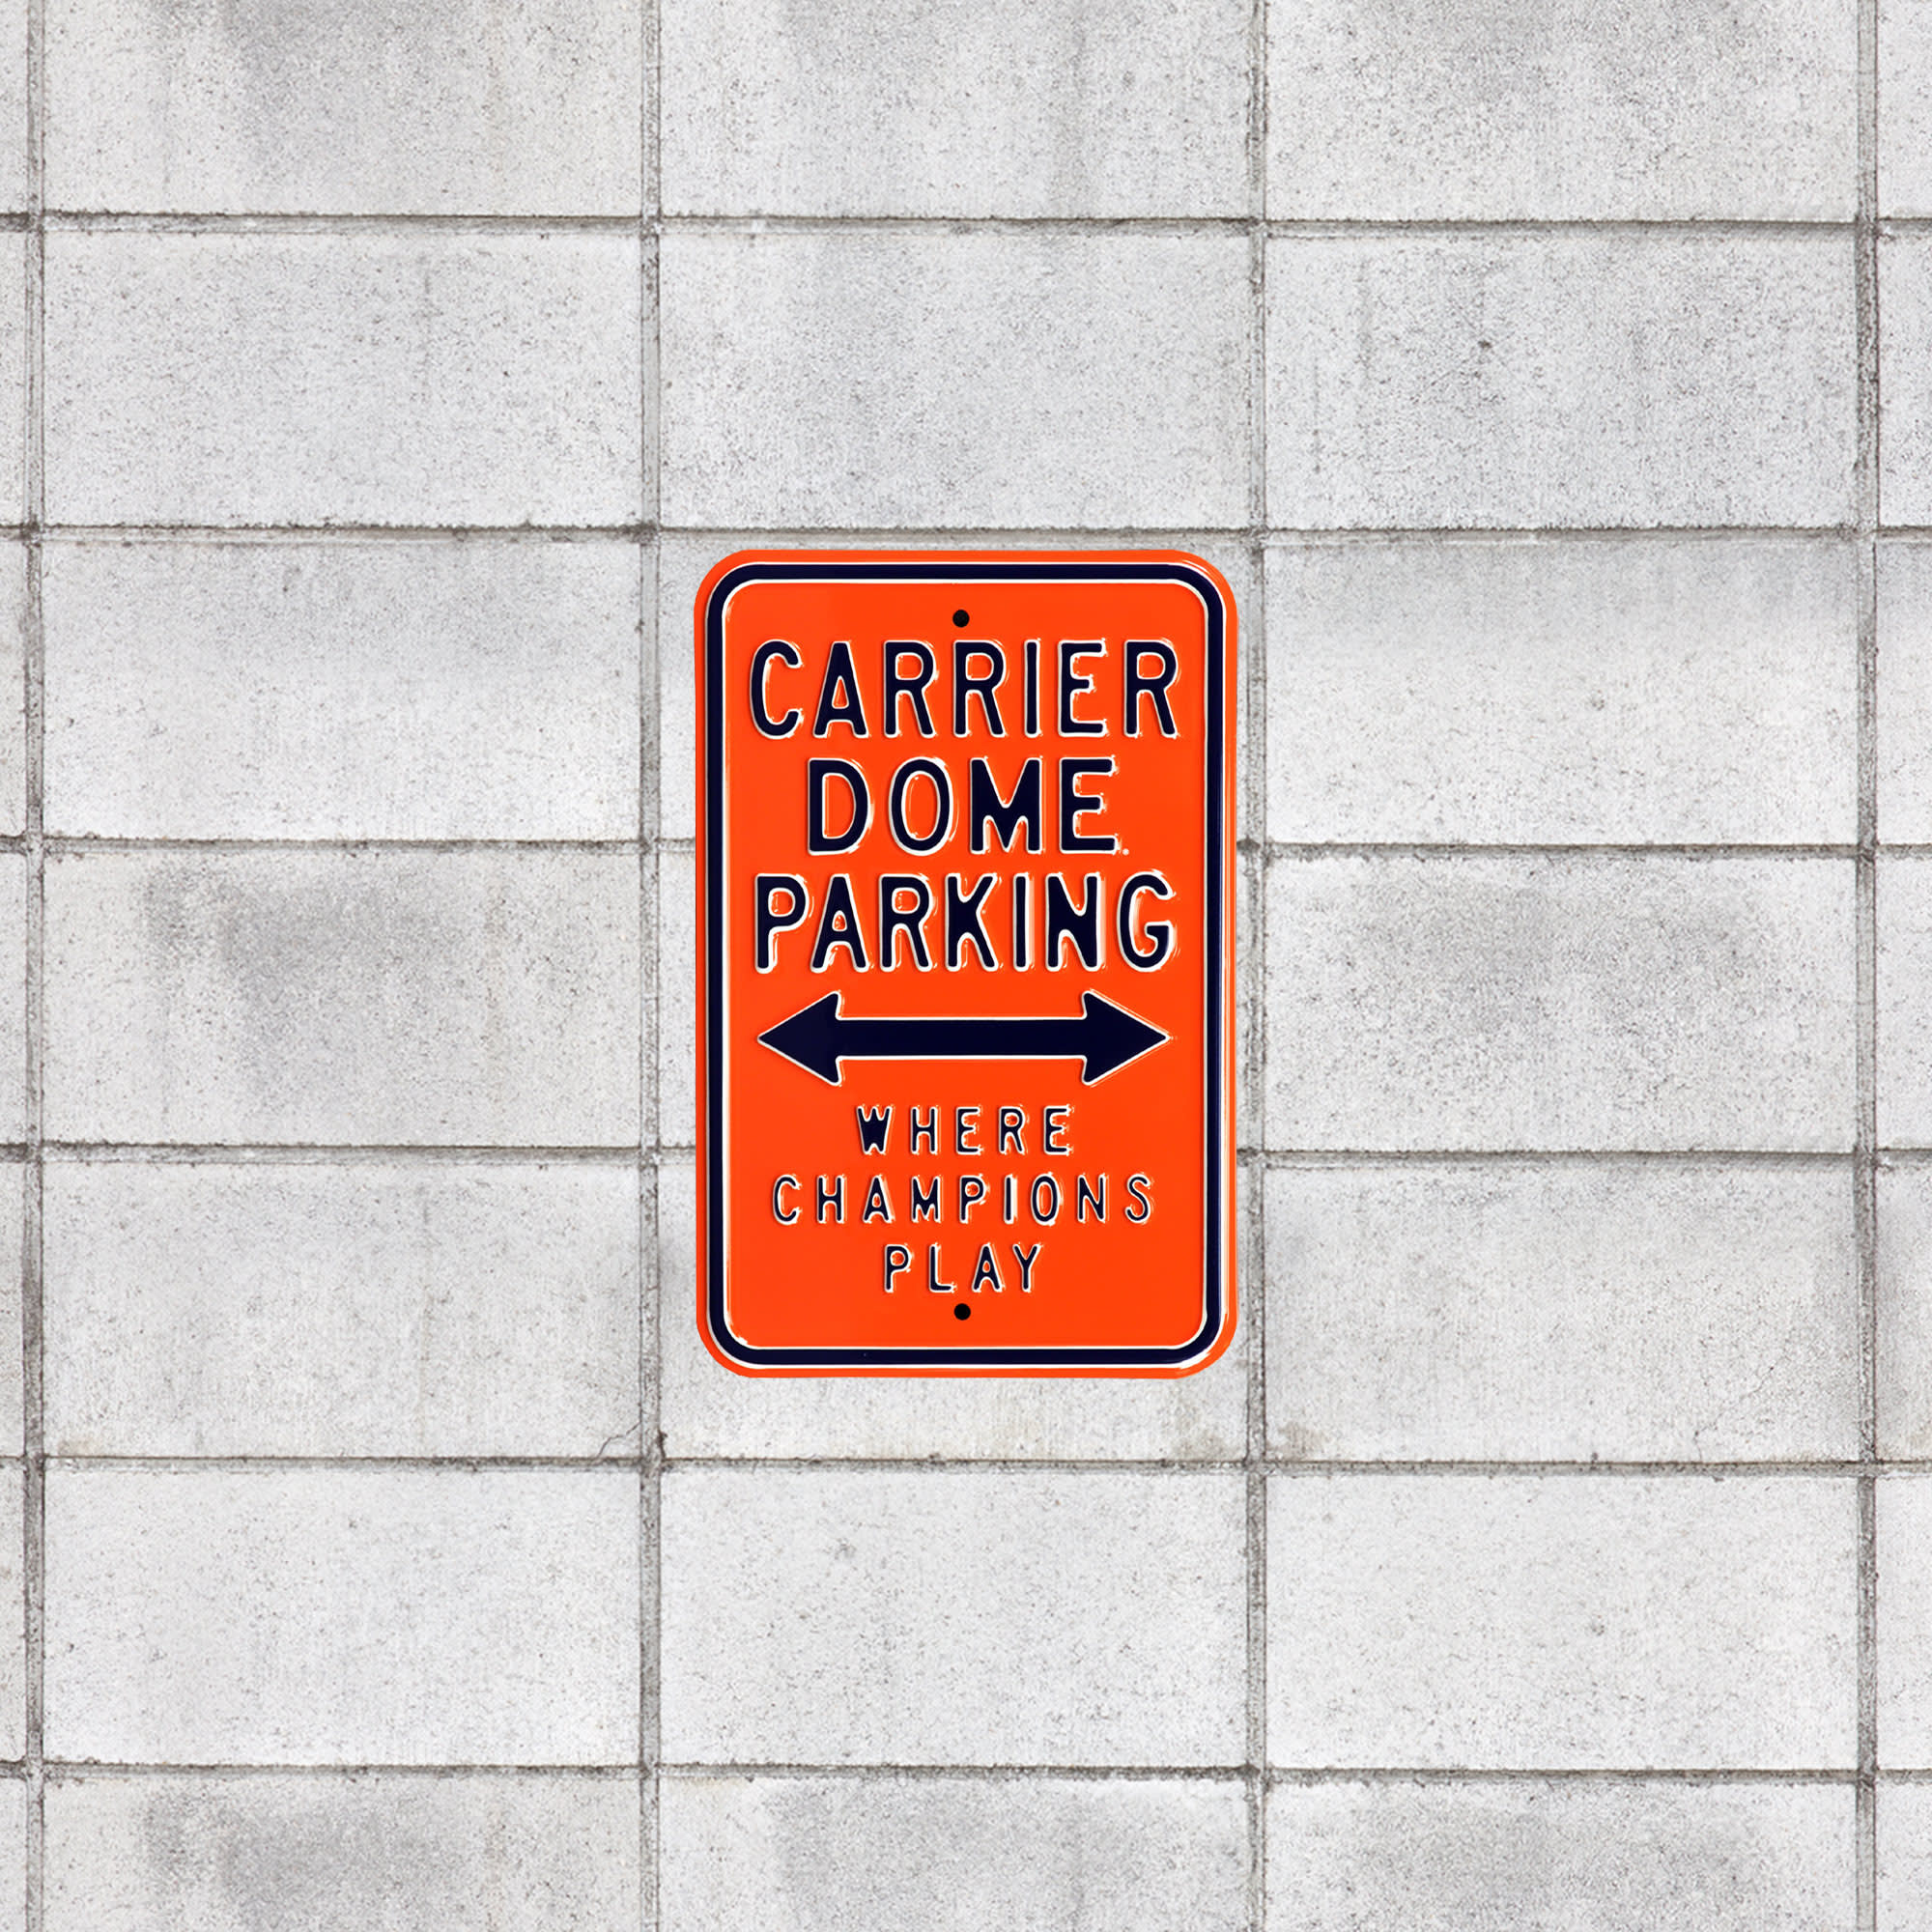 Syracuse Orange for Syracuse Orangemen: Where Champions Play Parking - Officially Licensed Metal Street Sign by Fathead | 100% S